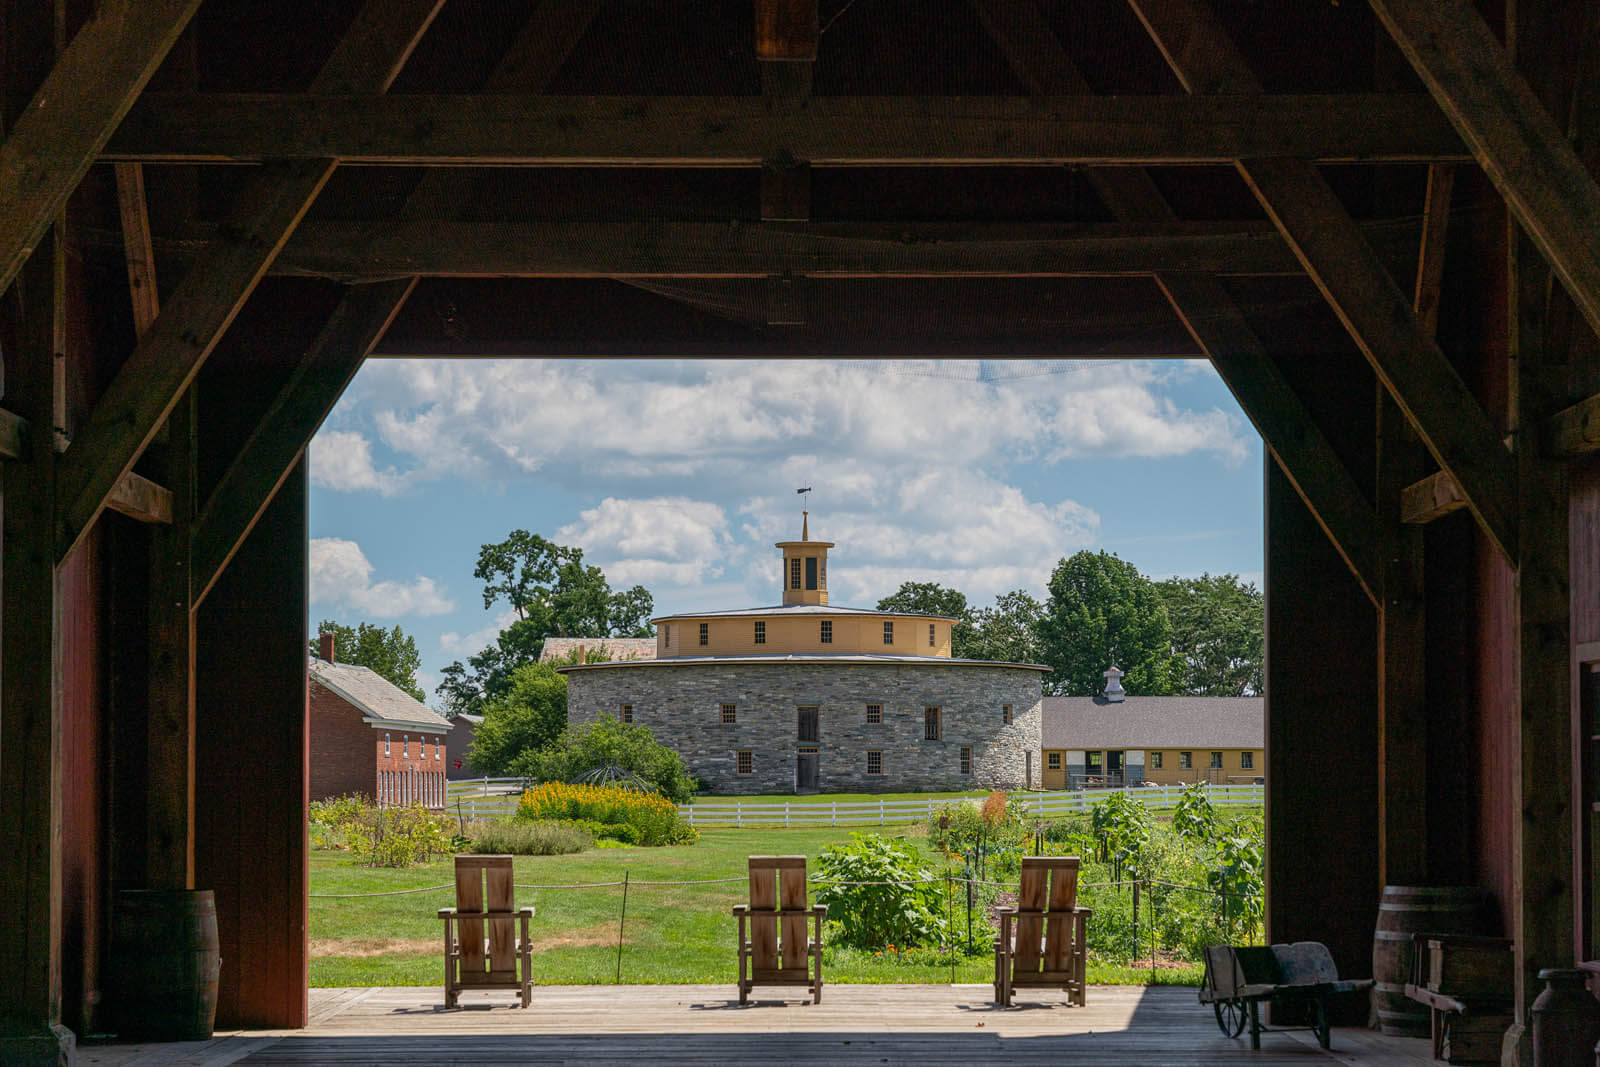 view of the barn at Hancock Shaker Village in the Berkshires near Pittsfield, MA